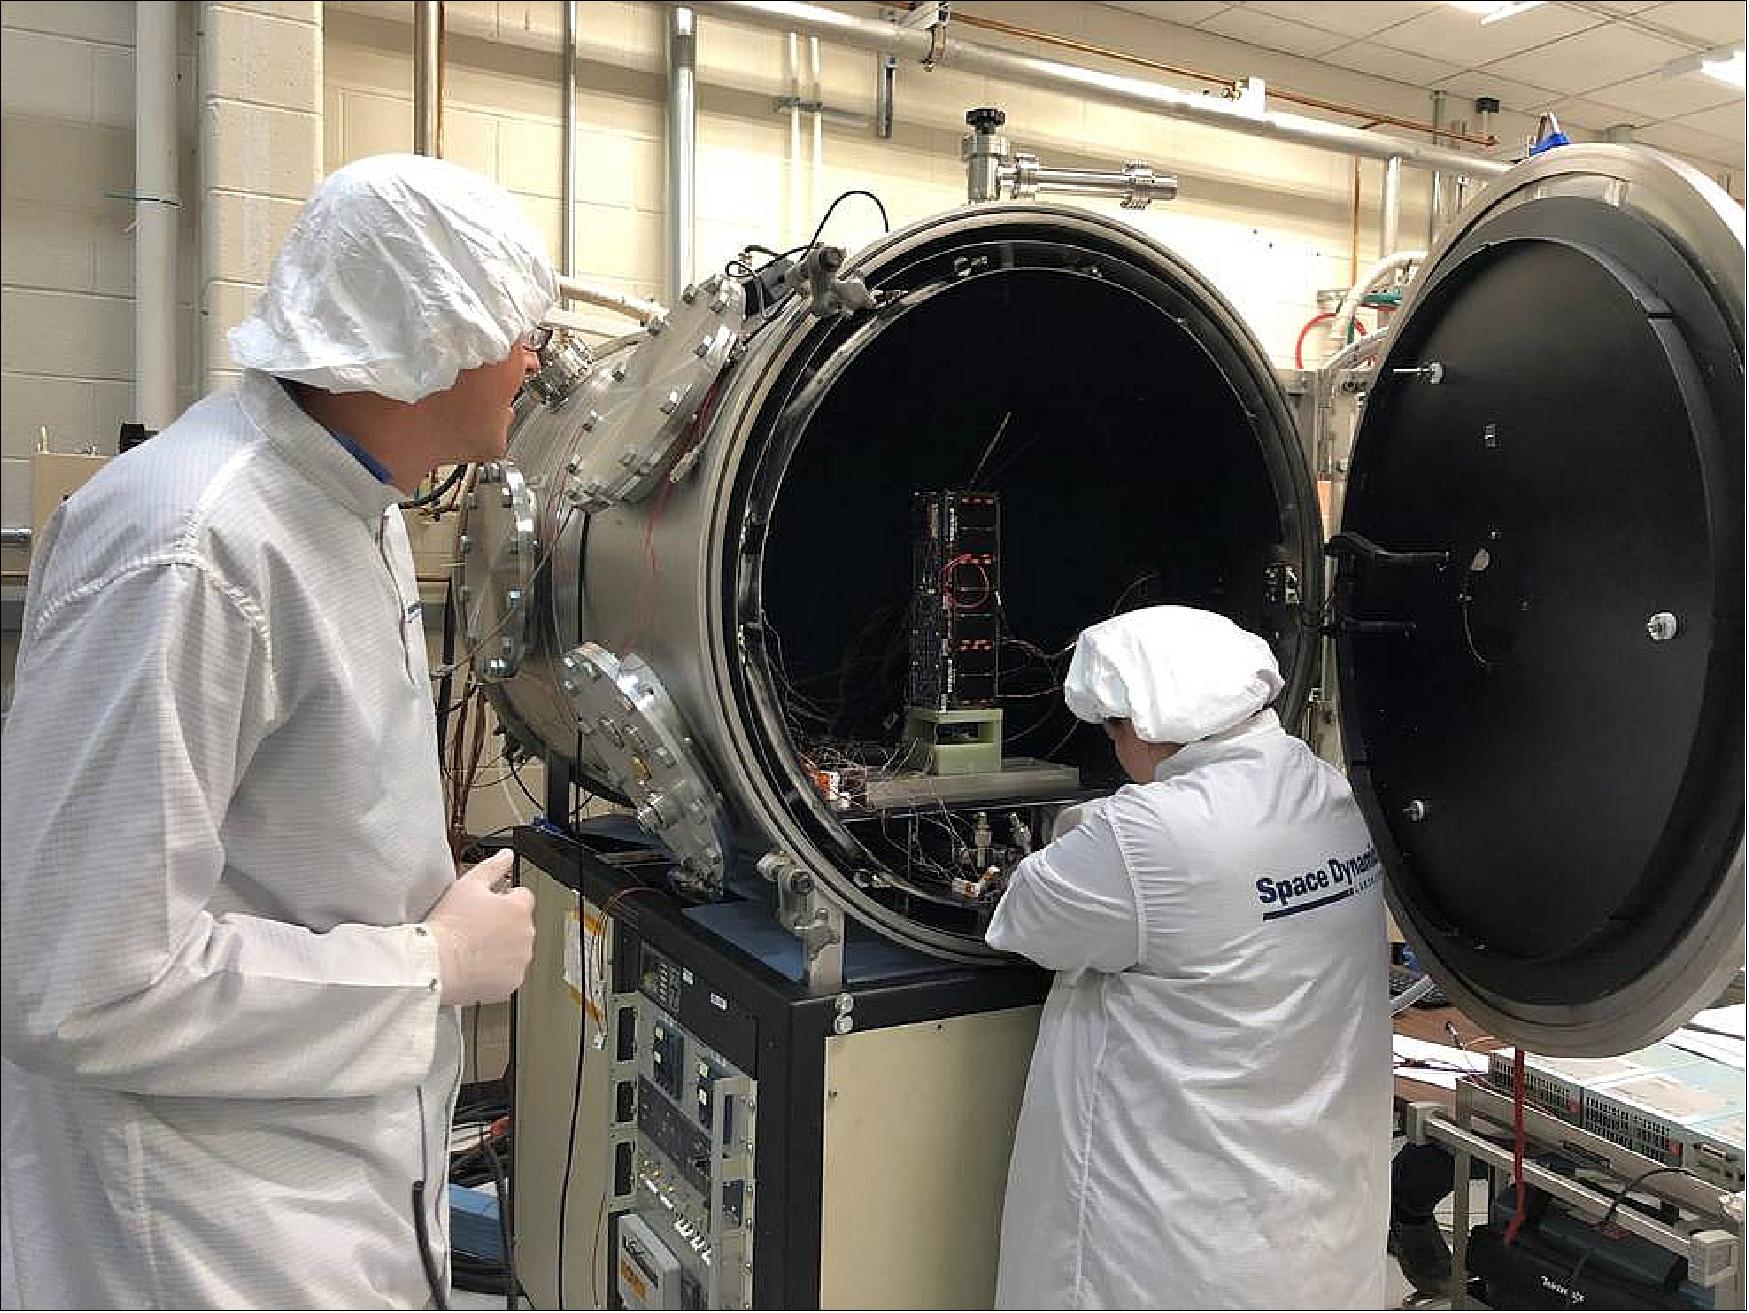 Figure 3: HARP Systems Engineer Ryan Martineau (left) and Thermal Vacuum Specialist Brittany Woytko configure HARP’s spacecraft in a thermal vacuum chamber at the Space Dynamics Laboratory in Logan, Utah. Woytko is connecting several temperature sensors to the spacecraft to monitor the instrument during testing. Once the door is shut on the chamber, it loses its air and simulates the vacuum of space. The chamber also heats and cools the spacecraft through several cycles to simulate the extreme hot and cold temperatures the spacecraft will pass through on orbit (image credit: USU/SDL) 5)